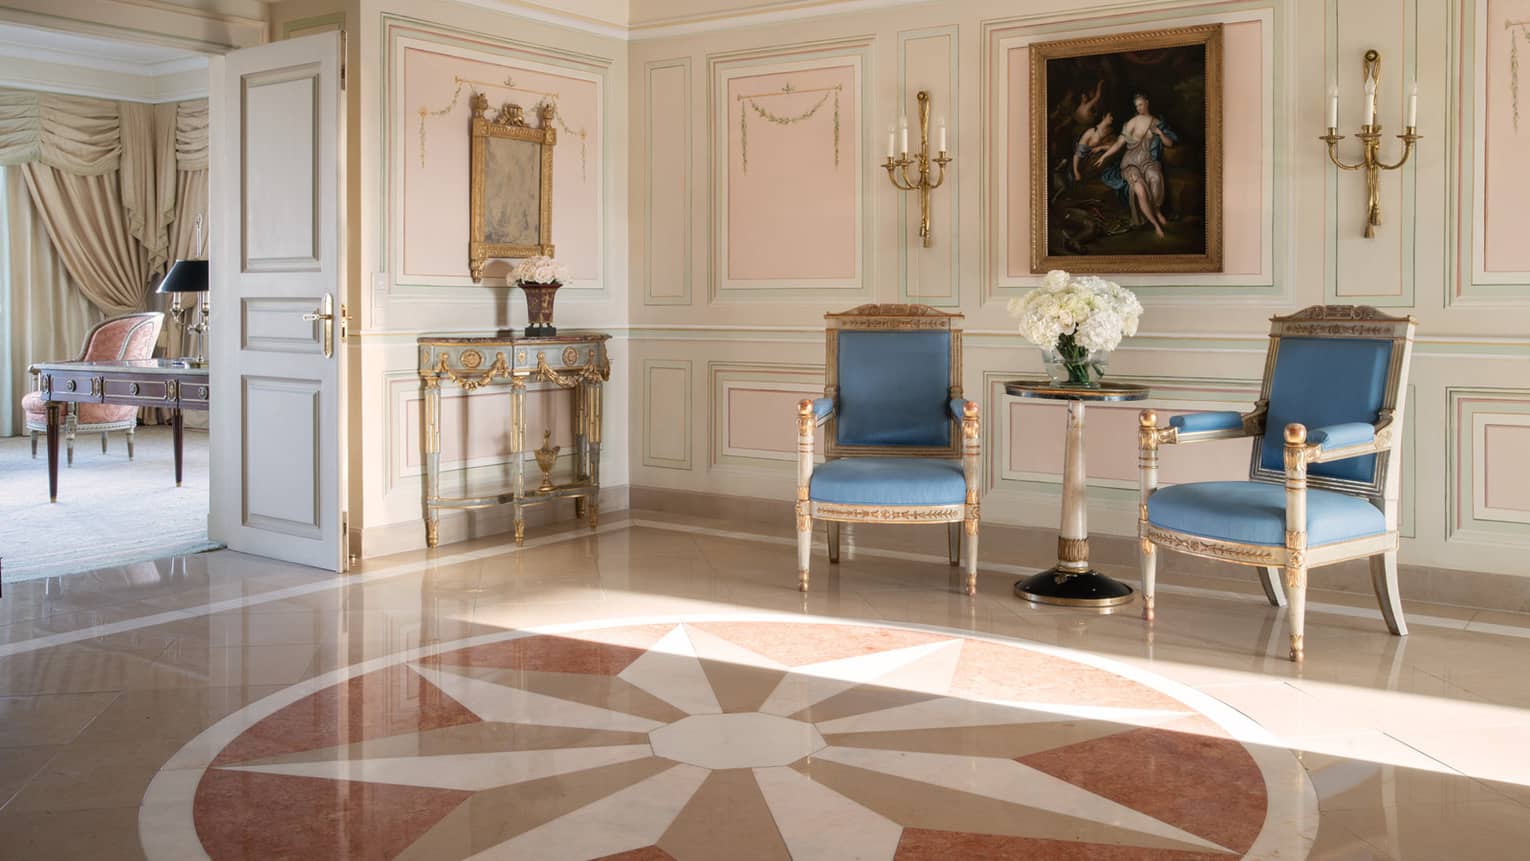 Presidential Suite lobby with large star floor motif and conversation seating with blue chairs against wall with heavy mouldings